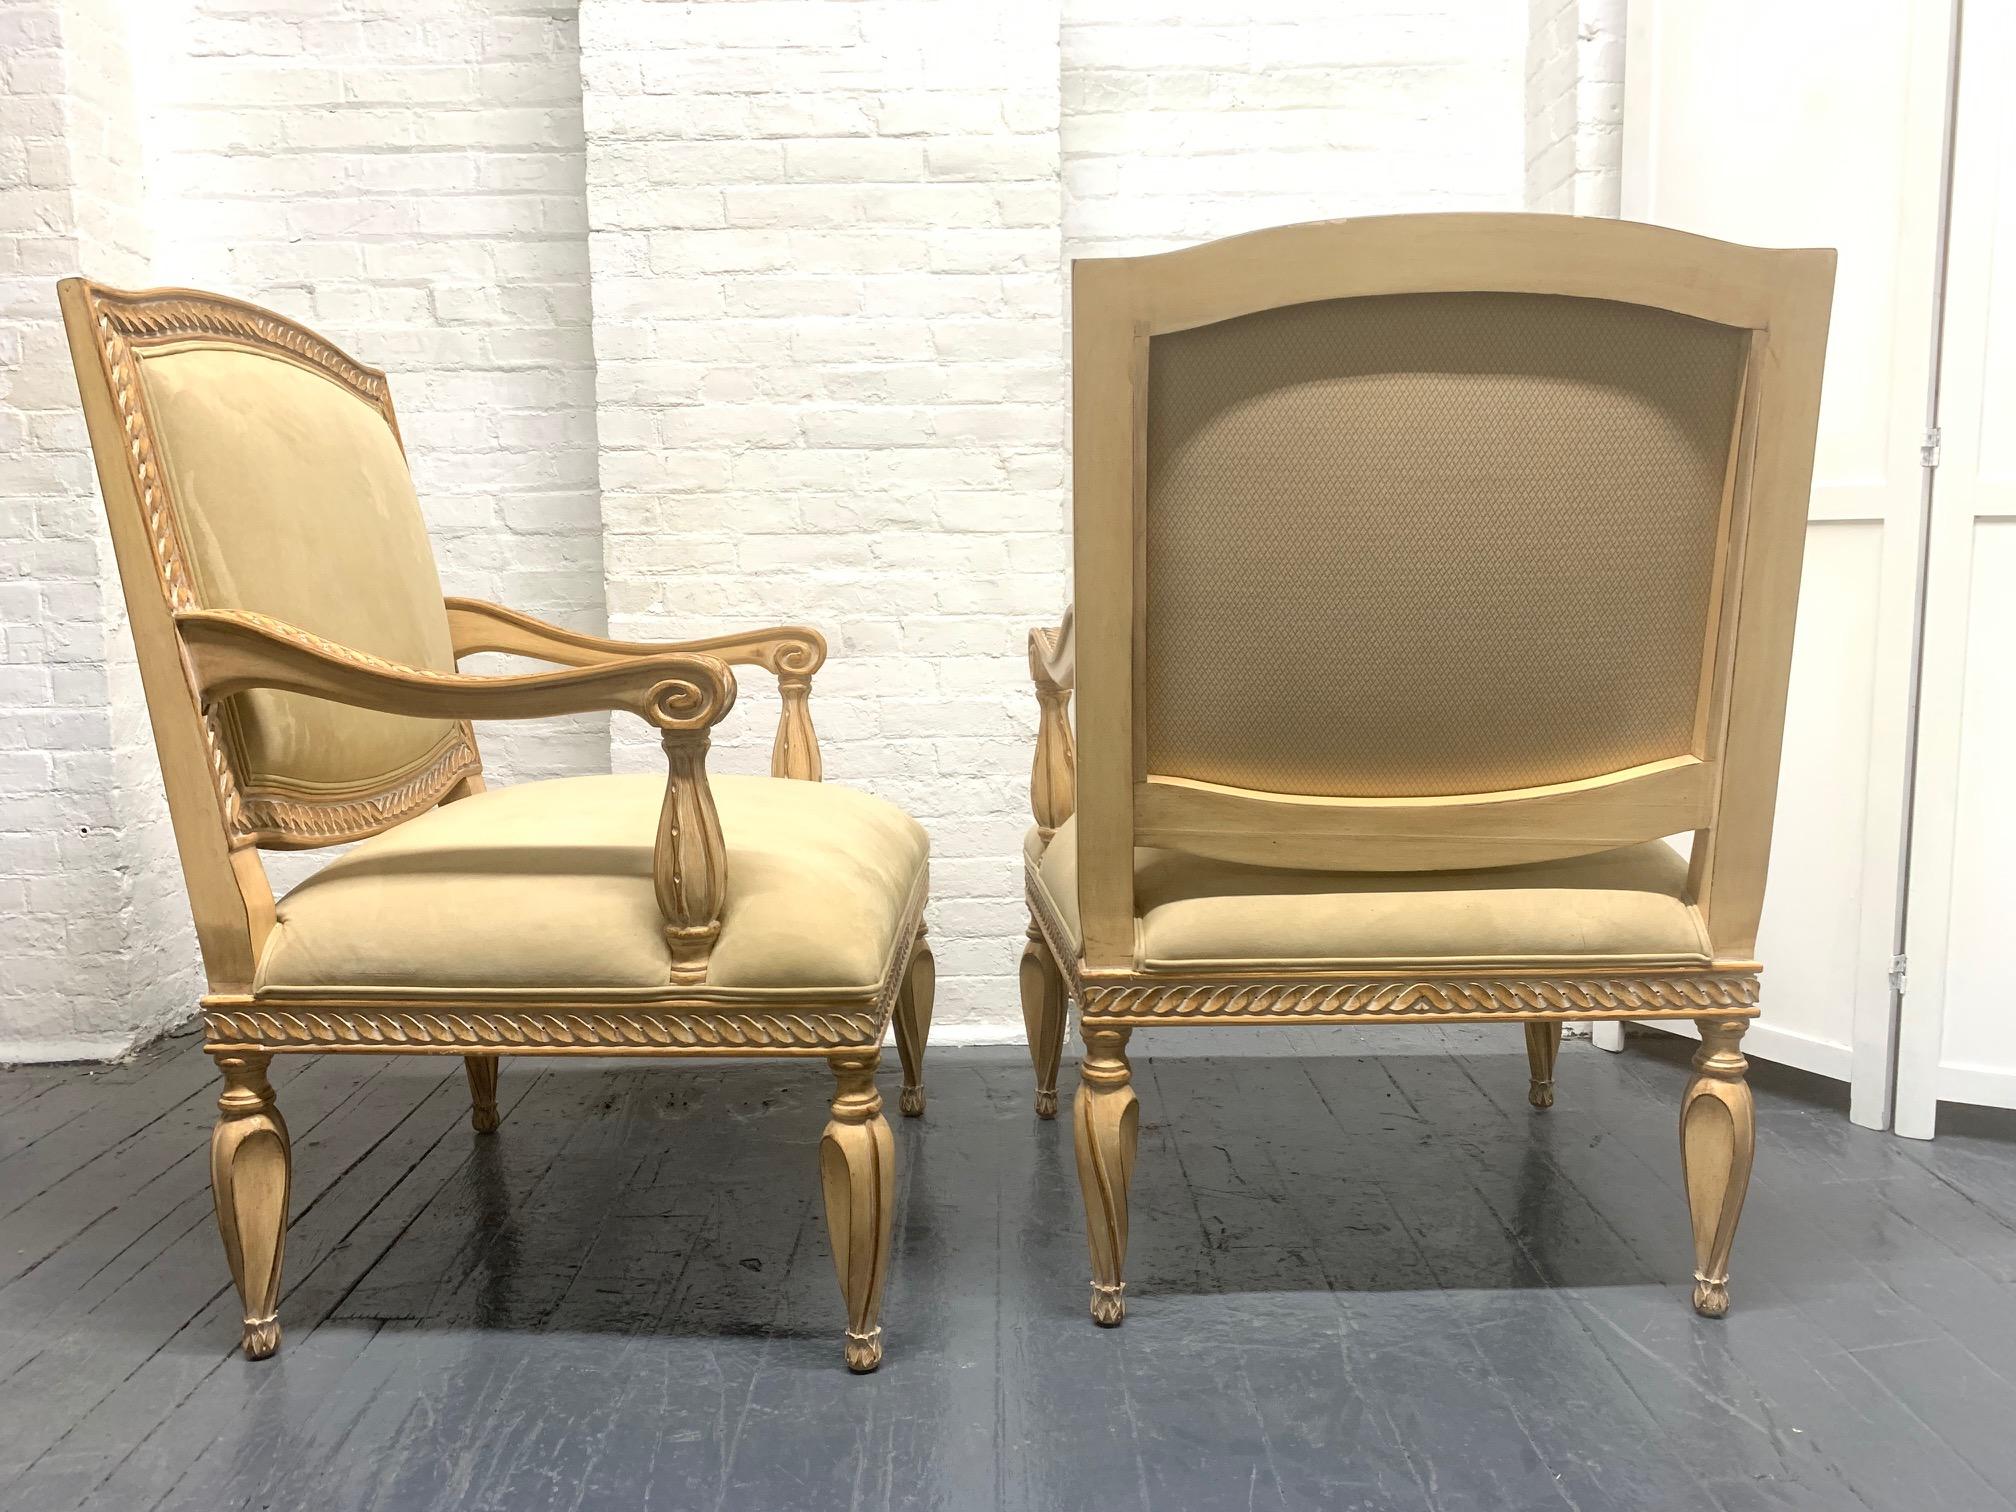 Pair of Kreiss collection armchairs in ultra-suede with a decorative painted wood frame.